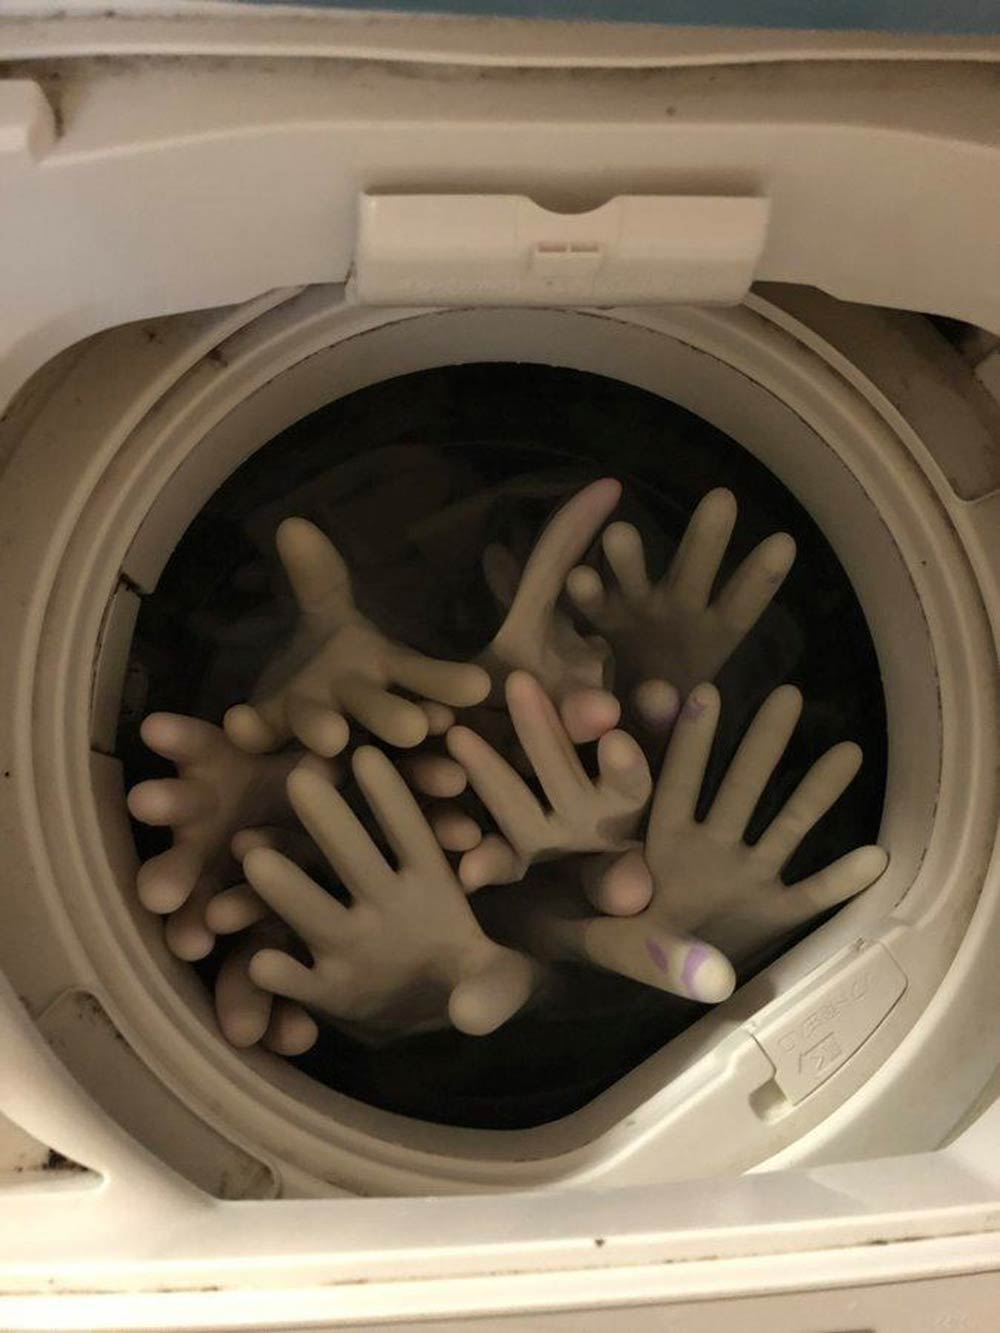 Washing gloves opened a gateway to hell